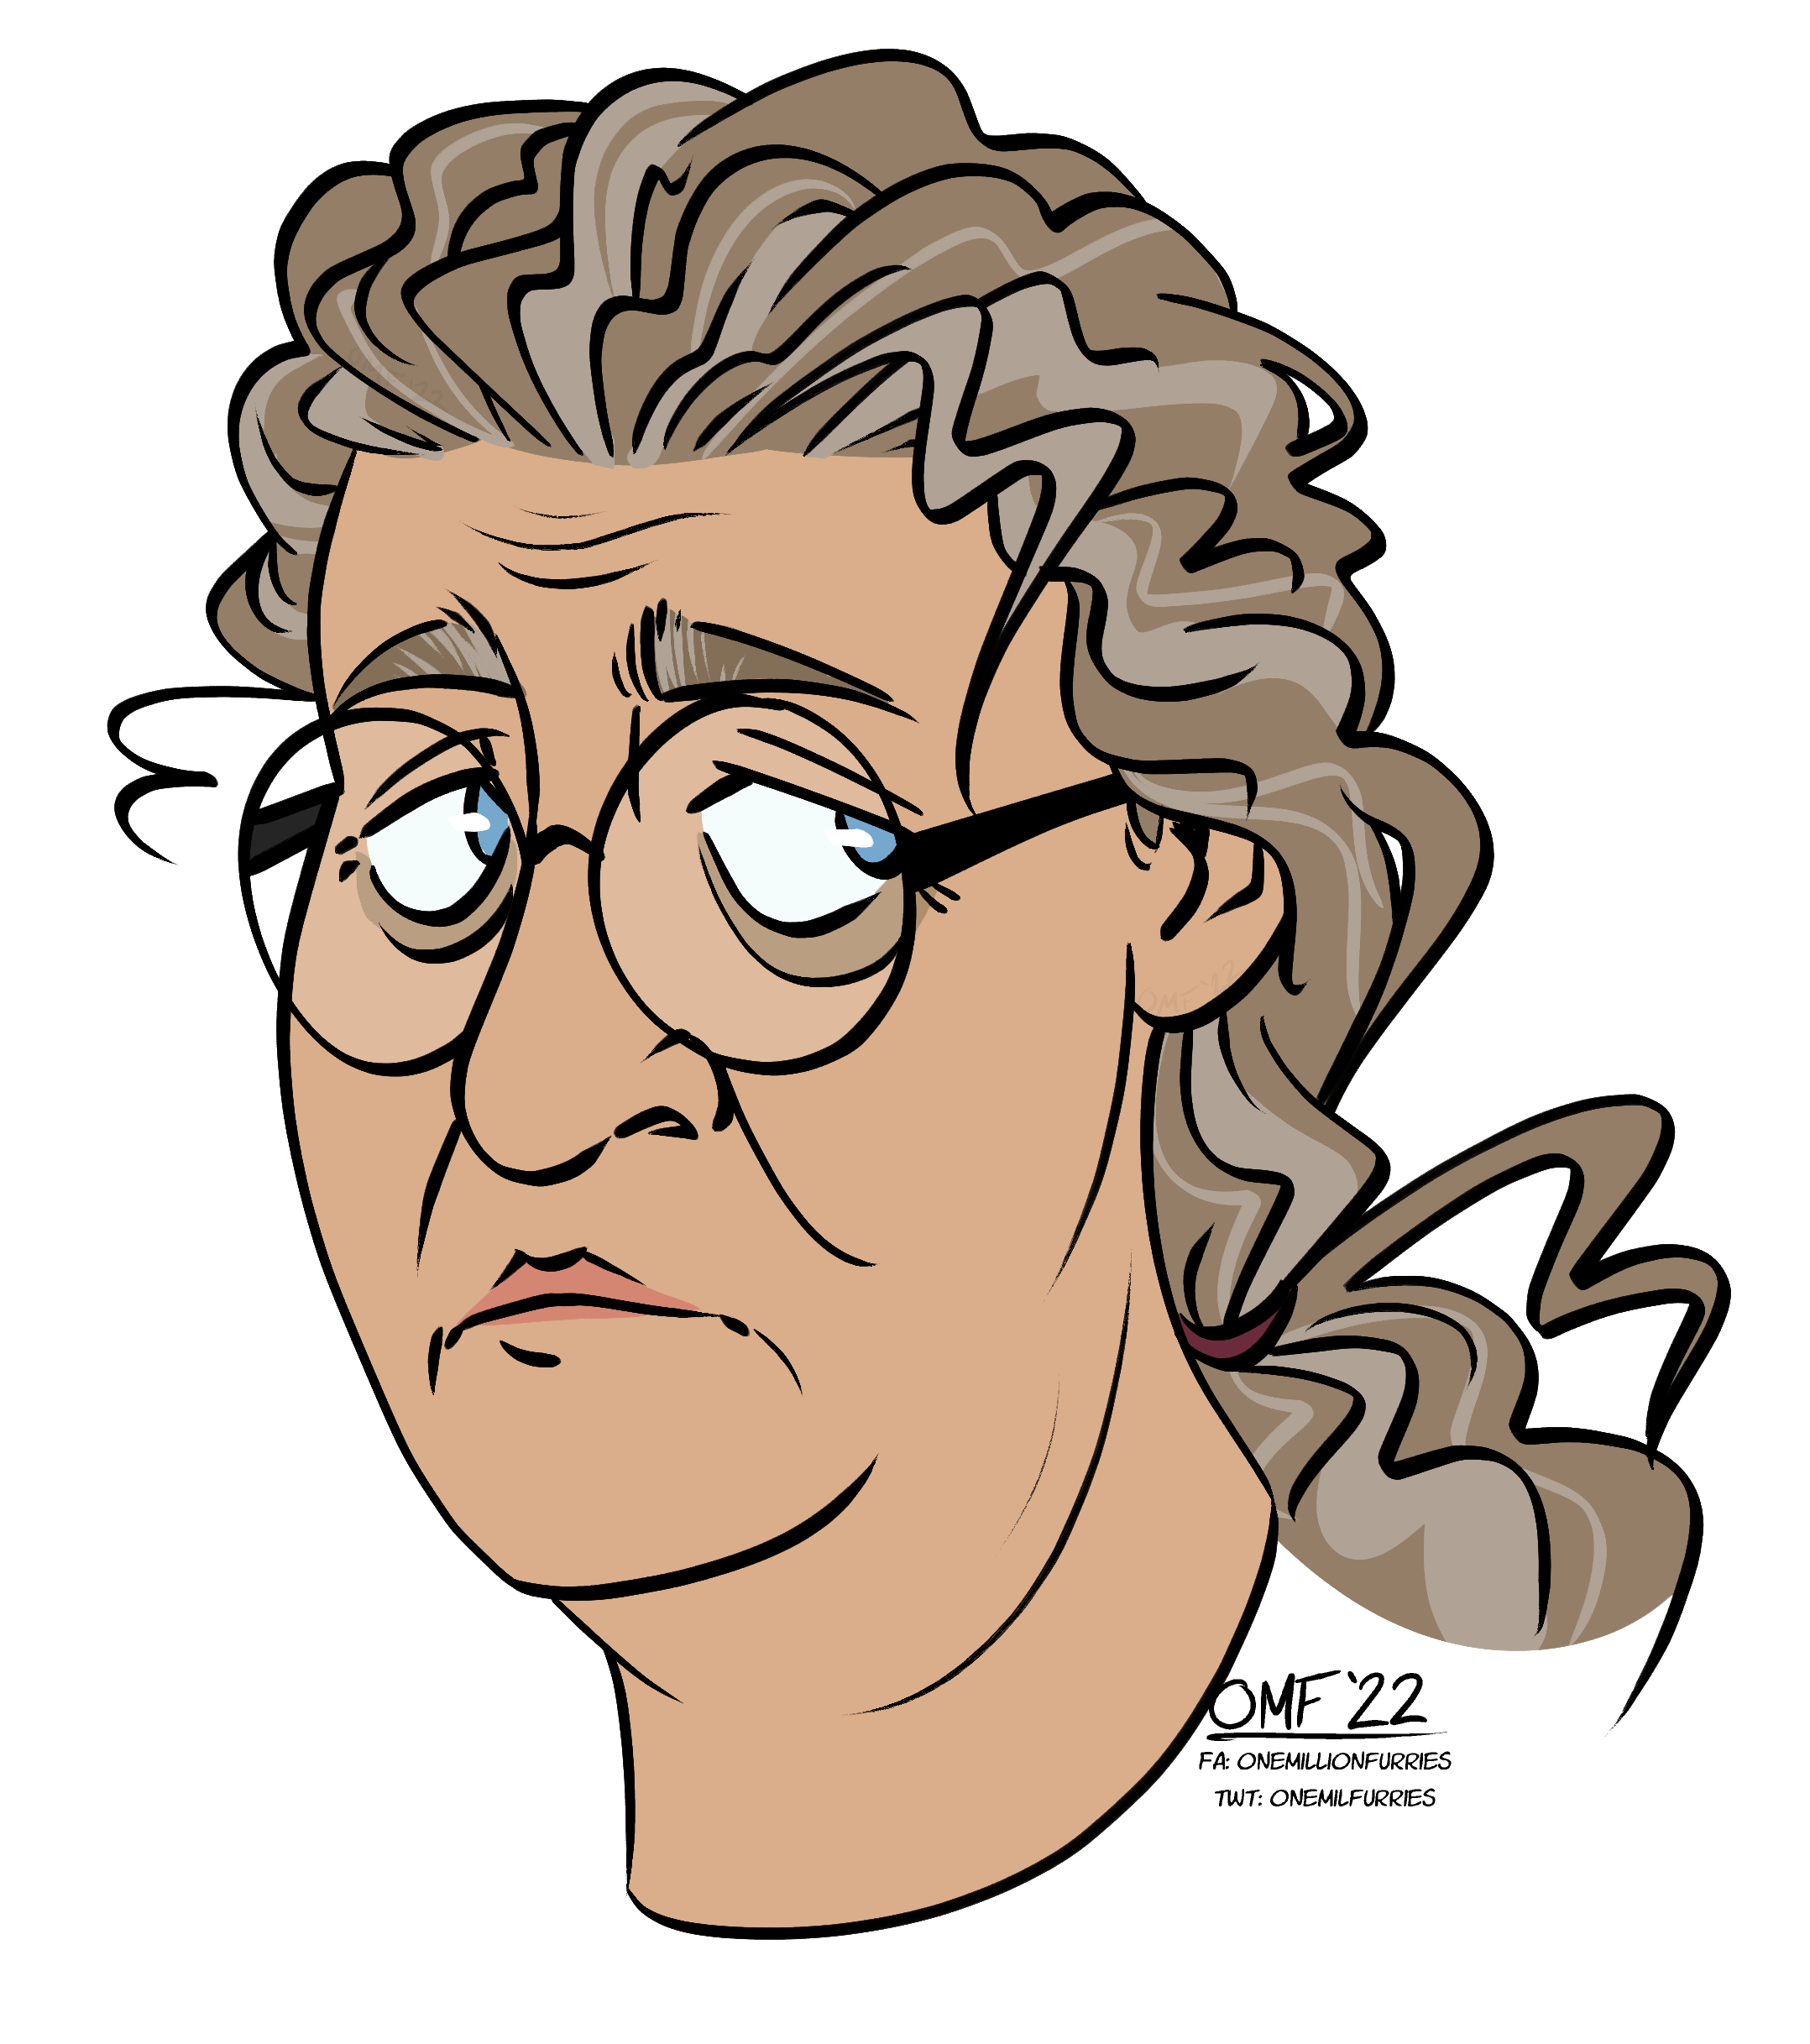 A headshot drawing of an older, slightly tan person with sunken blue eyes. They are wearing glasses and have their messy dark blonde hair tied in a ponytail. Their hair is curly and has grey streaks.